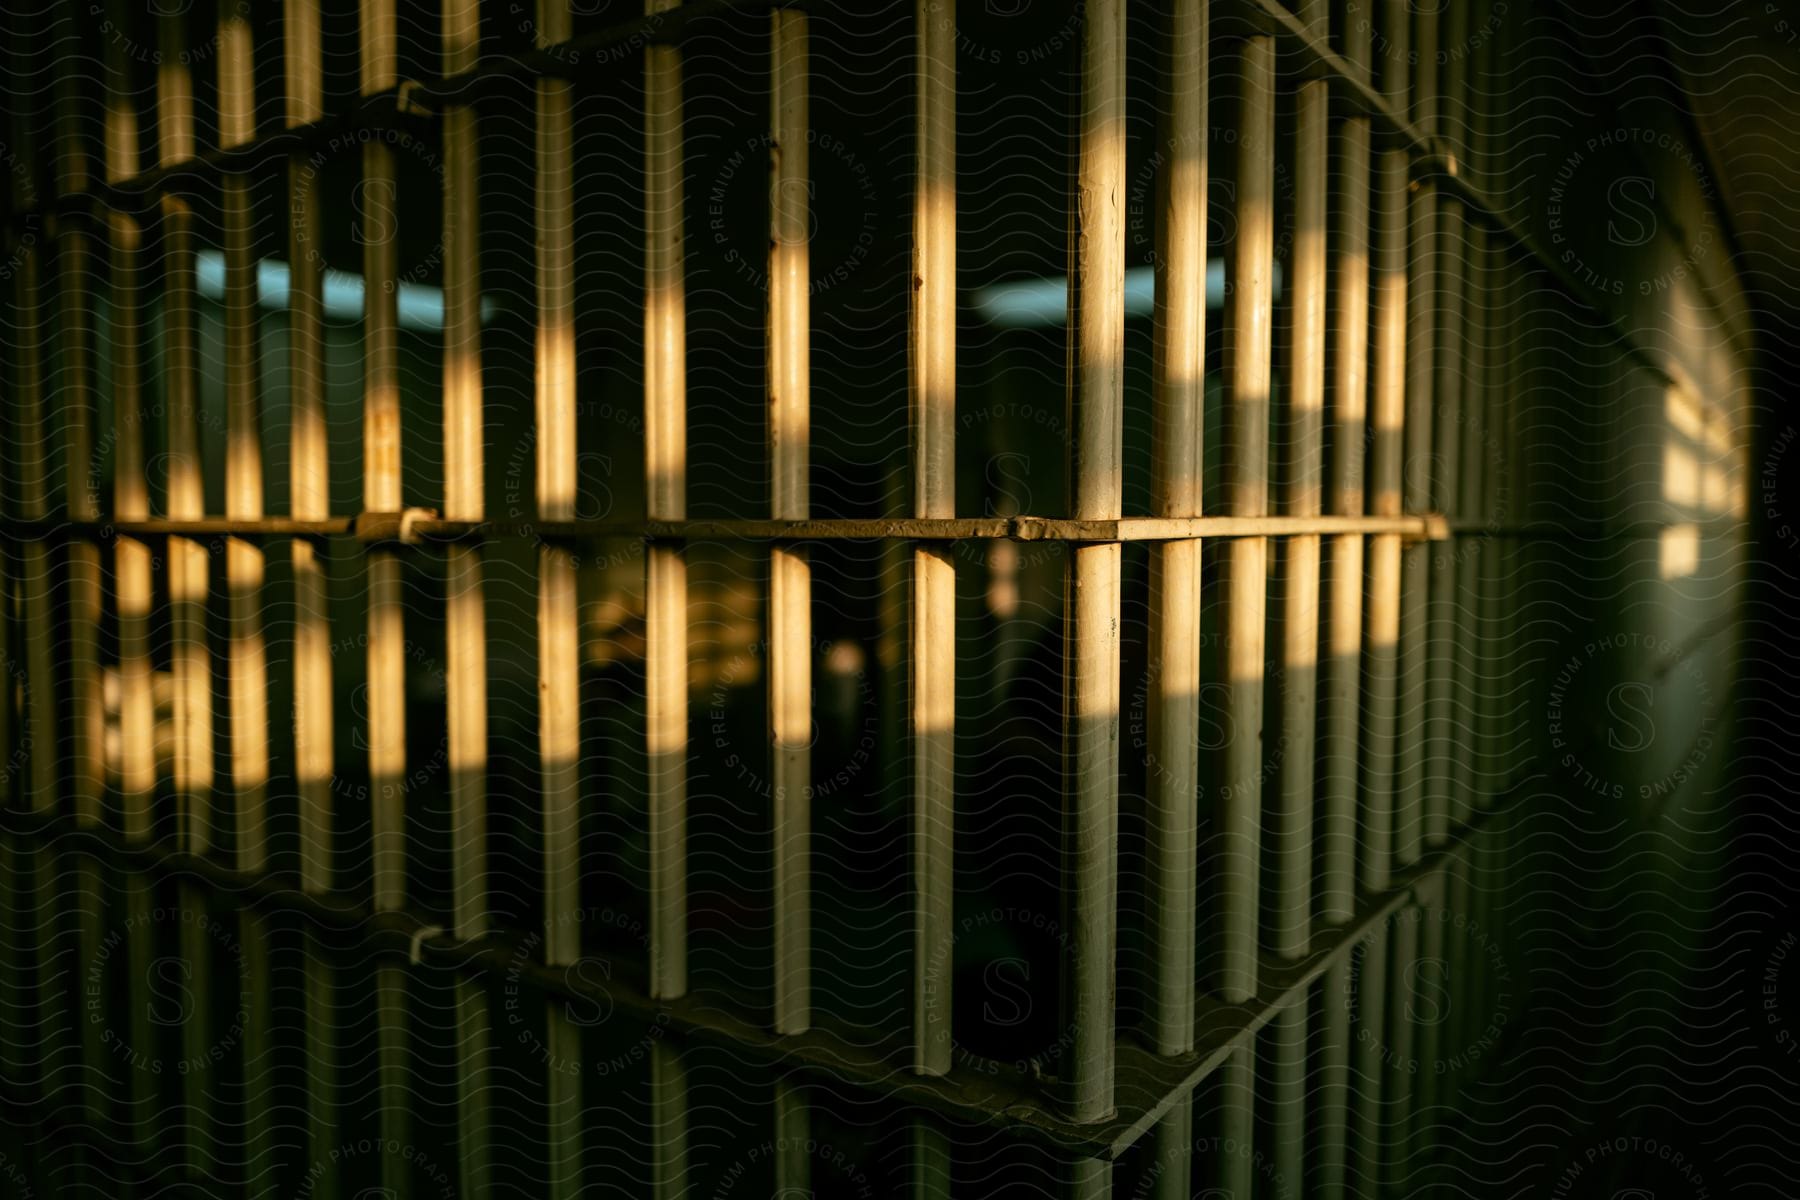 Jail cell bars in shadow an image of prison architecture